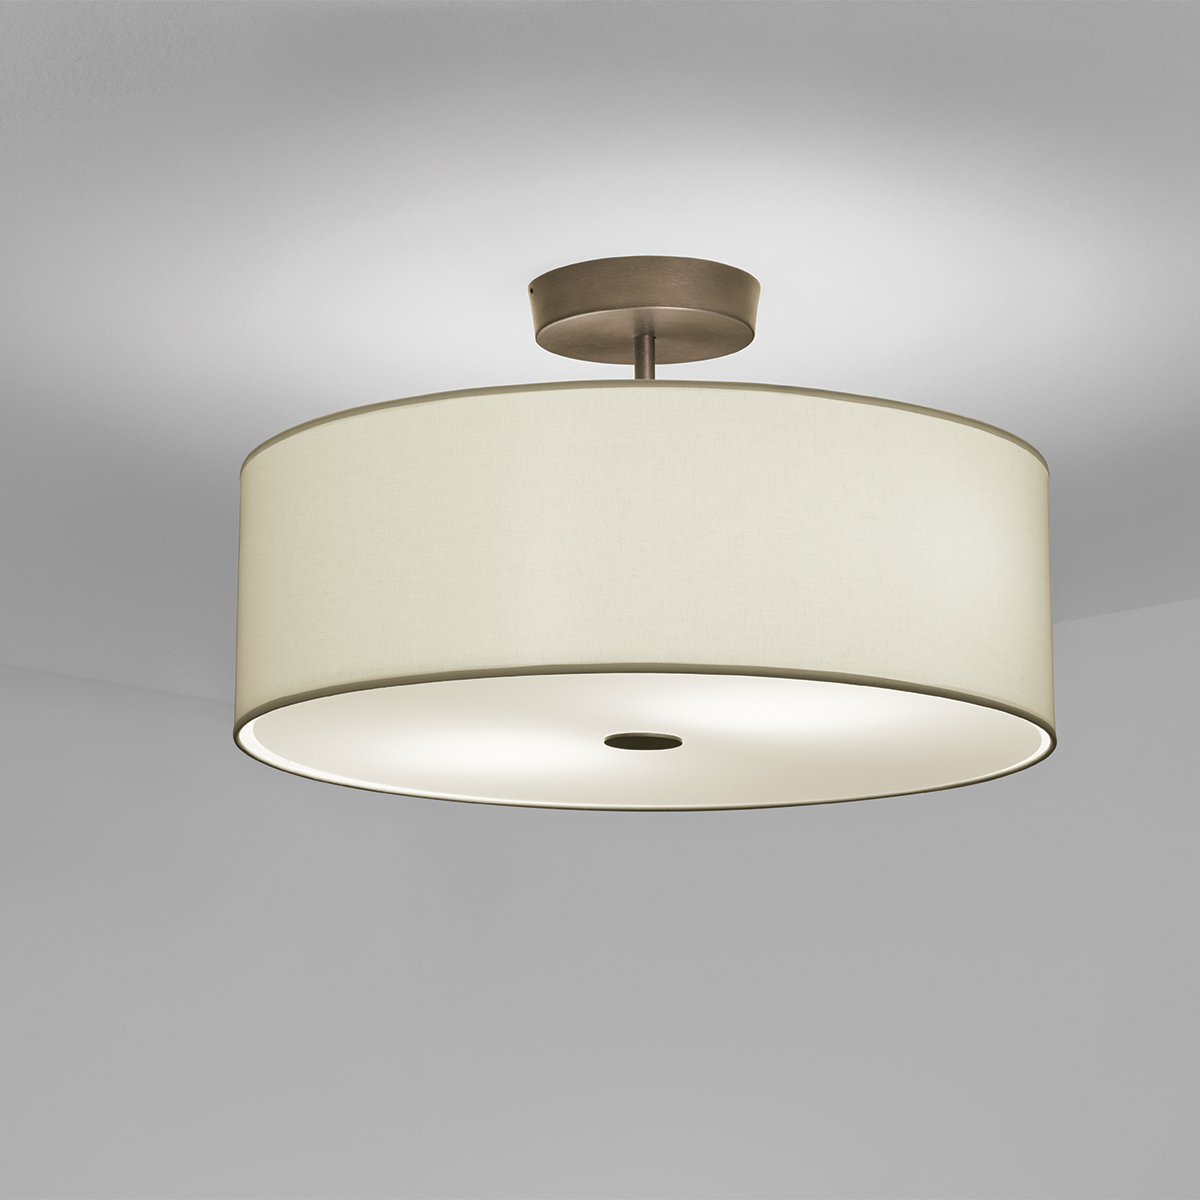 A ceiling mounted drum fixture with a fabric-looking shade